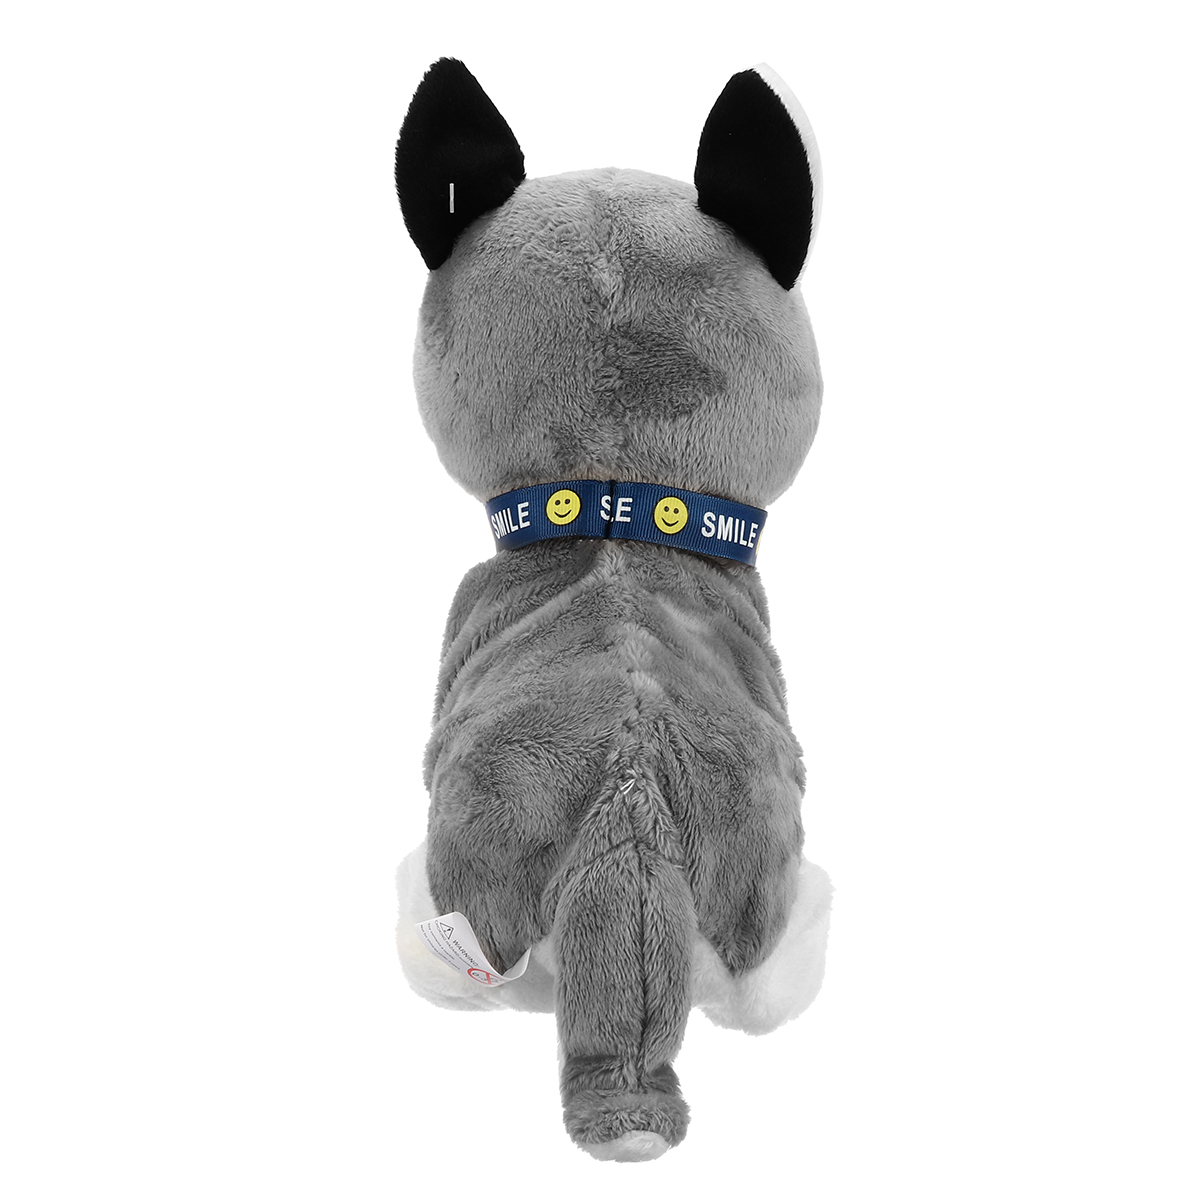 Interactive-Dog-Electronic-Pet-Stuffed-Plush-Toy-Control-Walk-Sound-Husky-Reacts-Touch-1414452-7